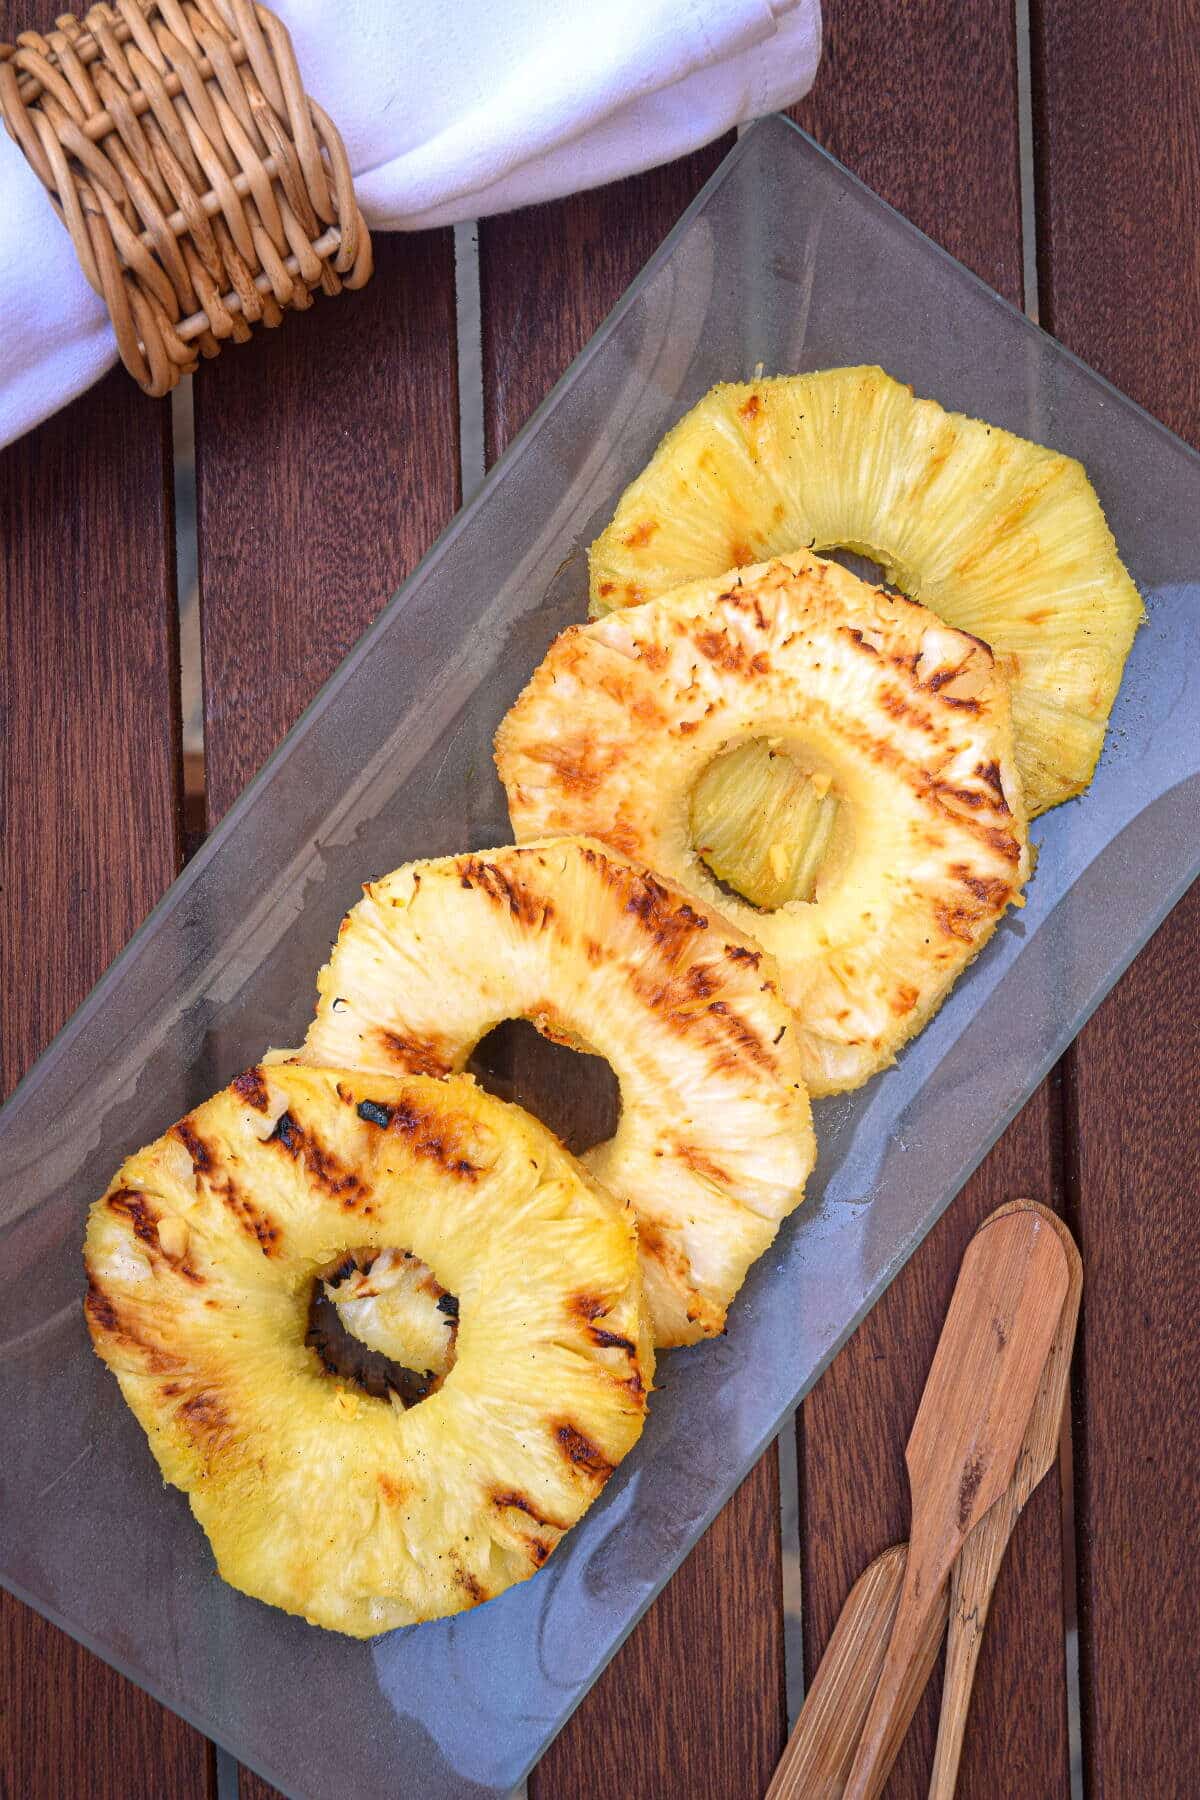 Grilled pineapple slices on glass serving dish on wooden table.